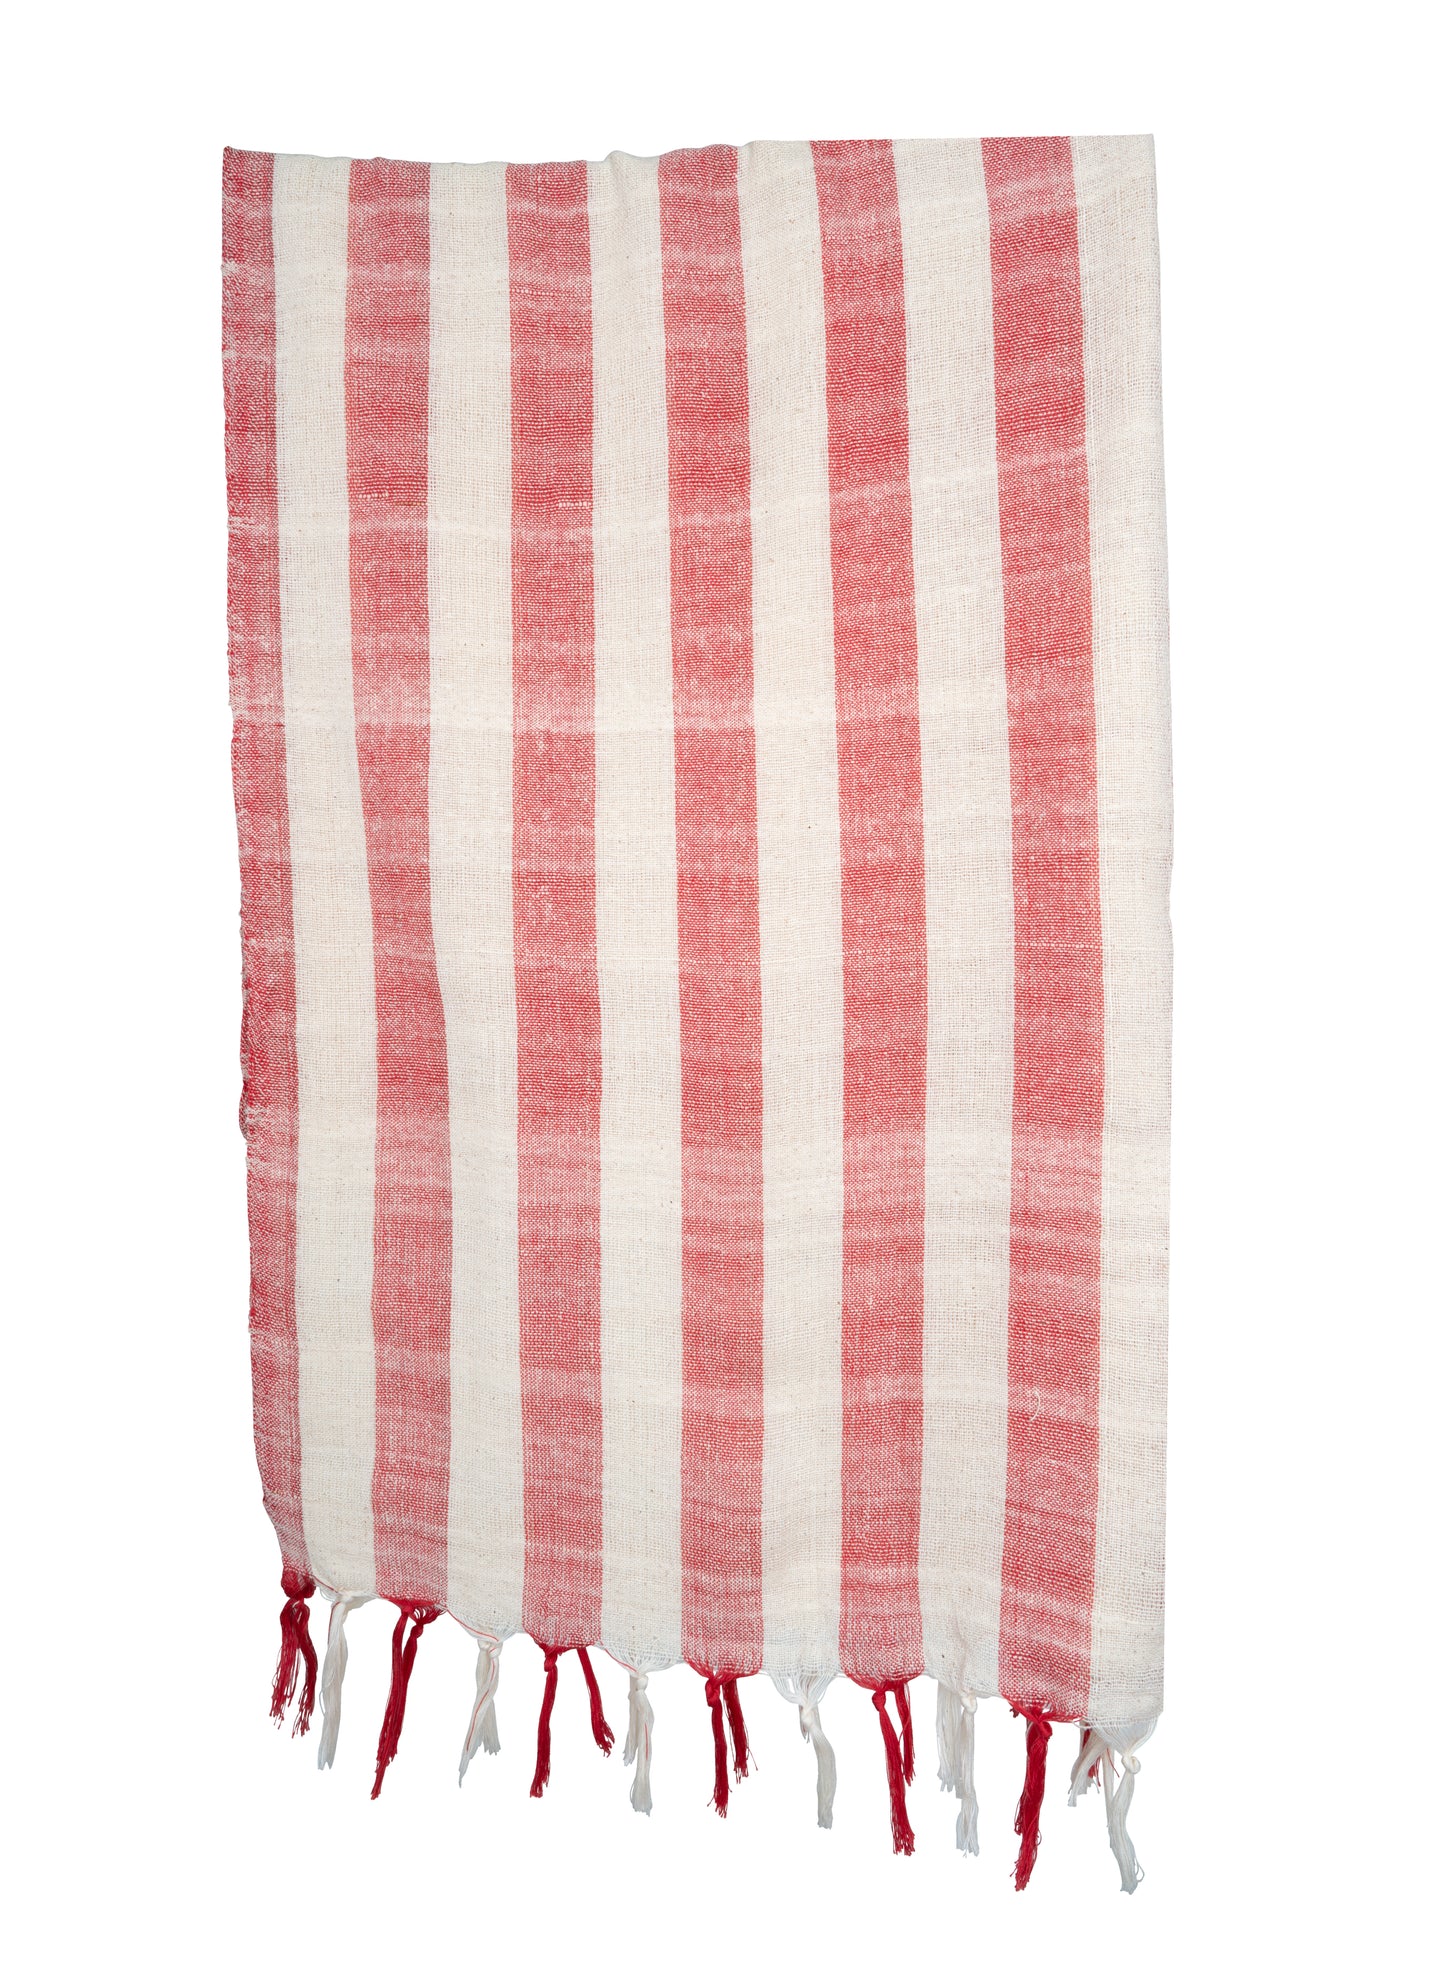 Stiped red and white Natural Dyed Handspun Handwoven Cotton Scarf & Shawls Patterned - CCCollections